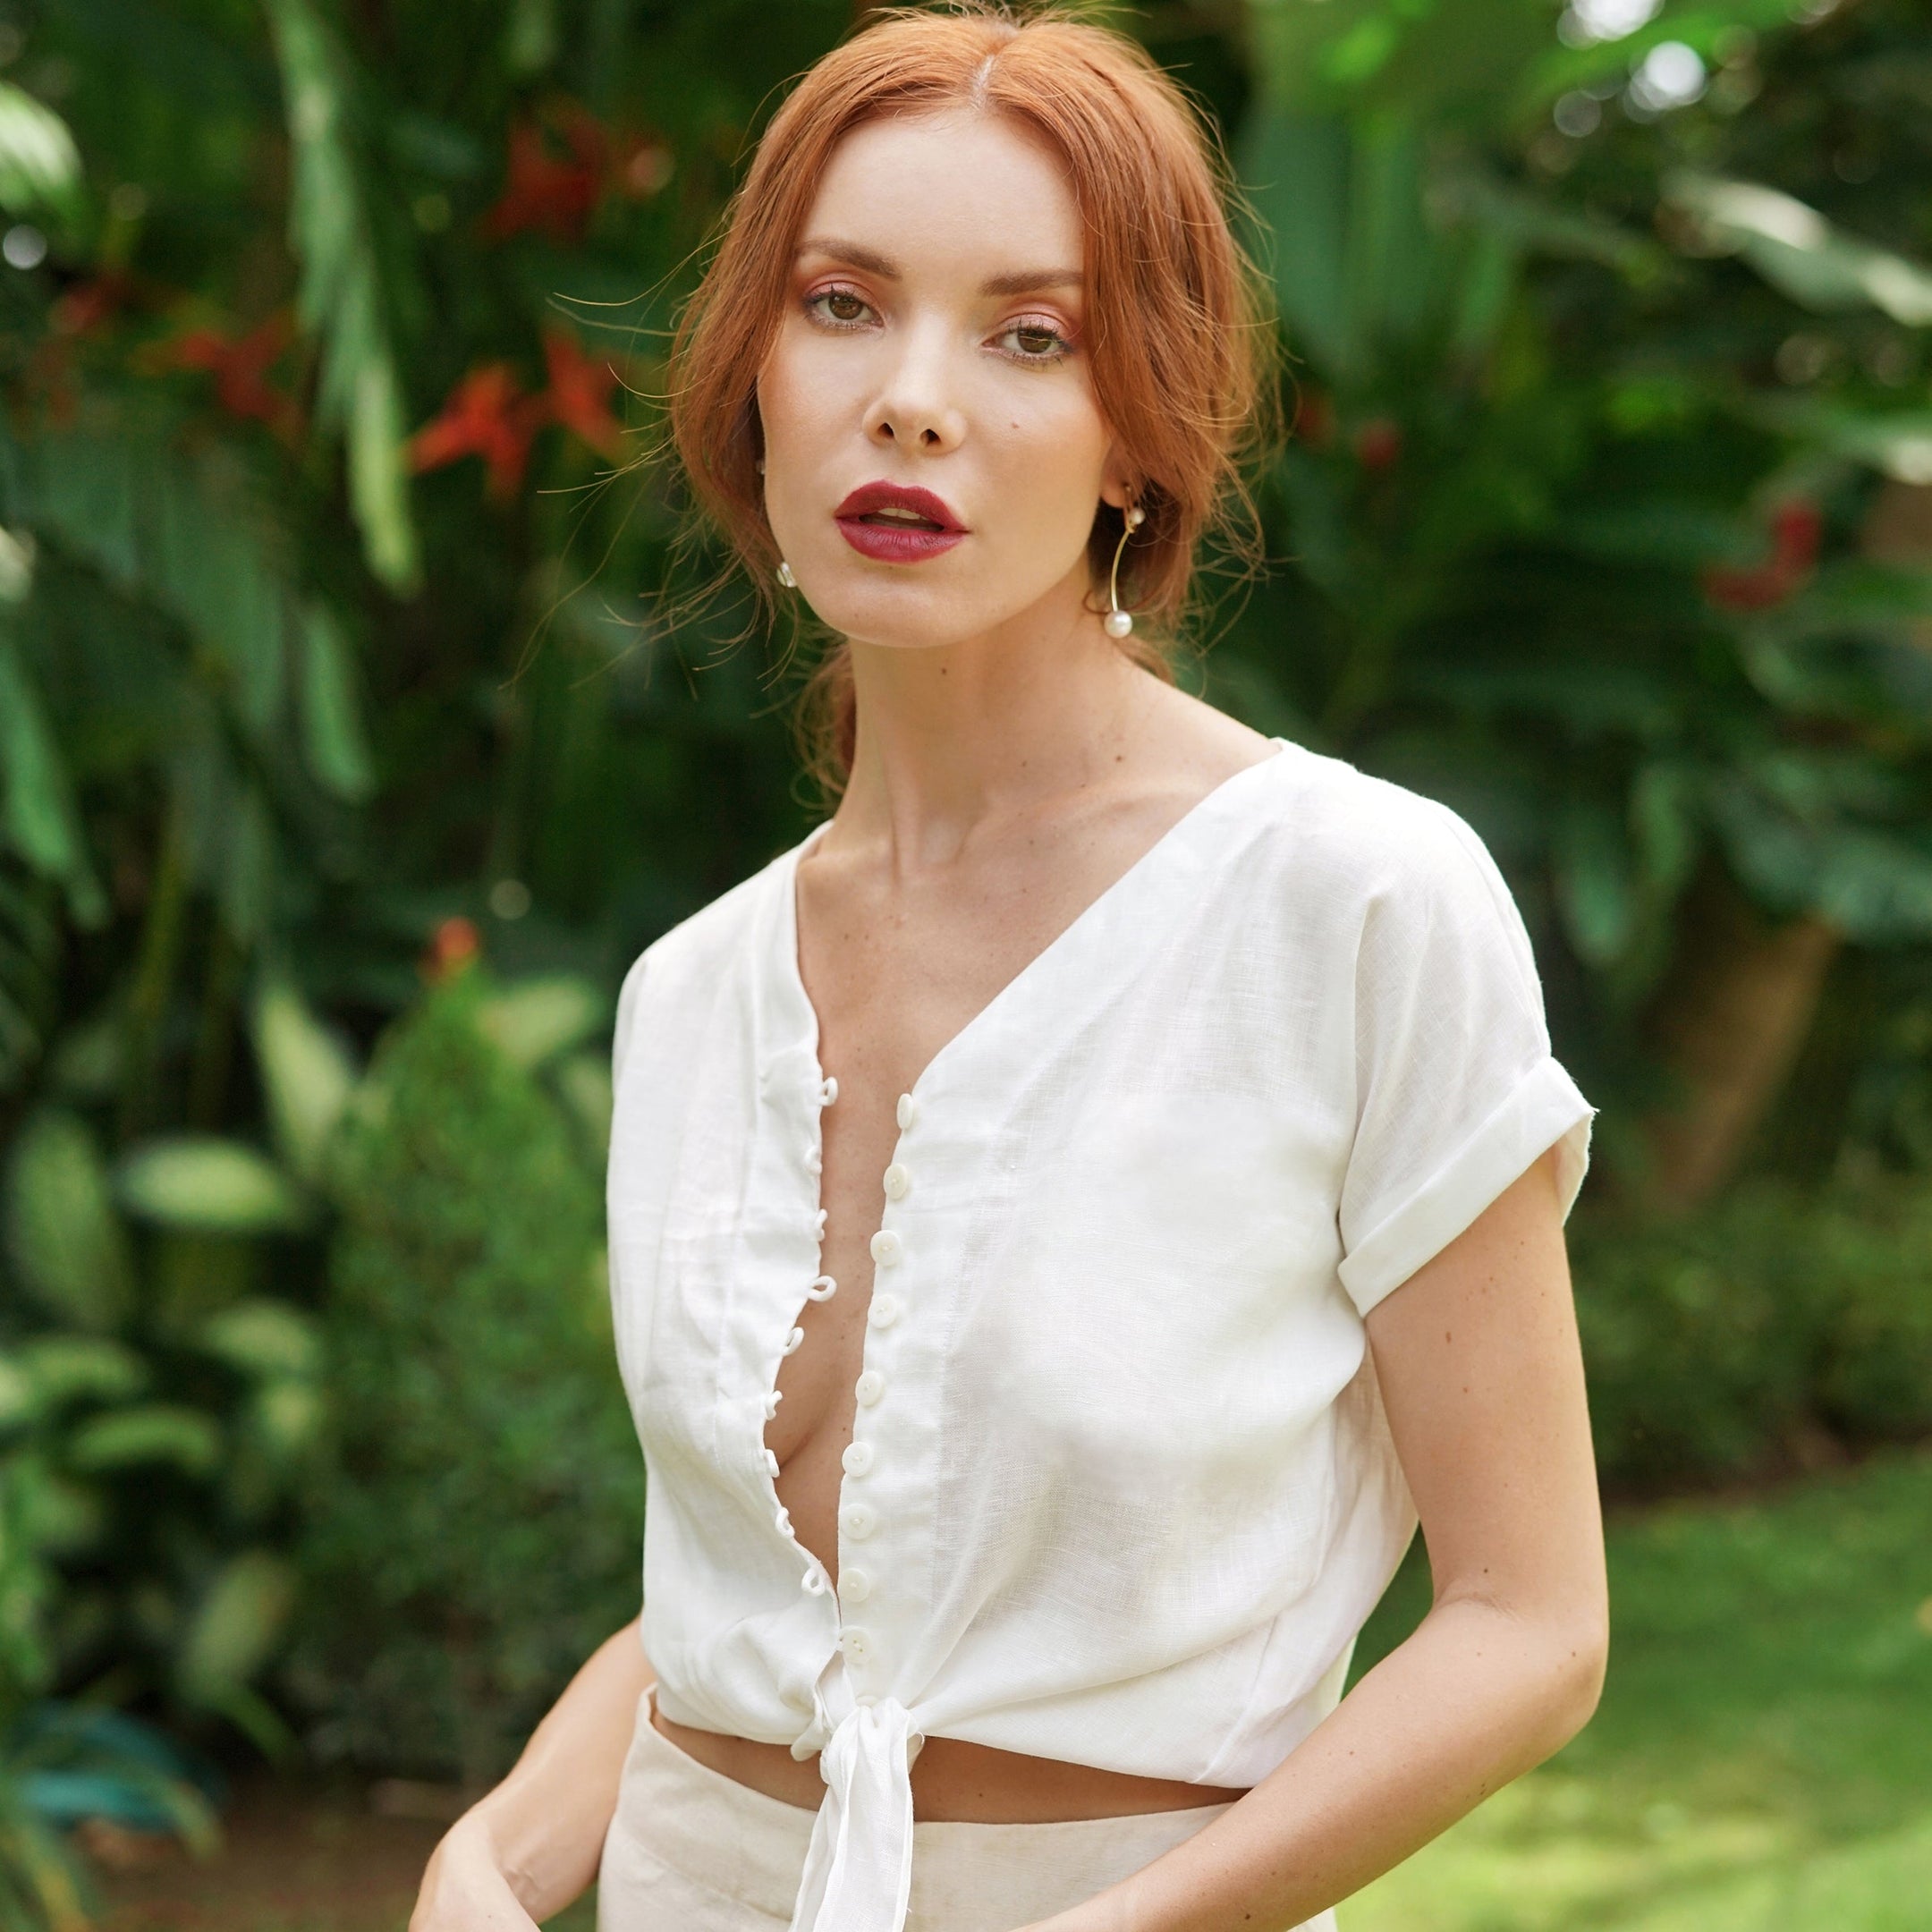 Buy LANA Handwoven Linen Knot Shirt, in Off-White by BrunnaCo